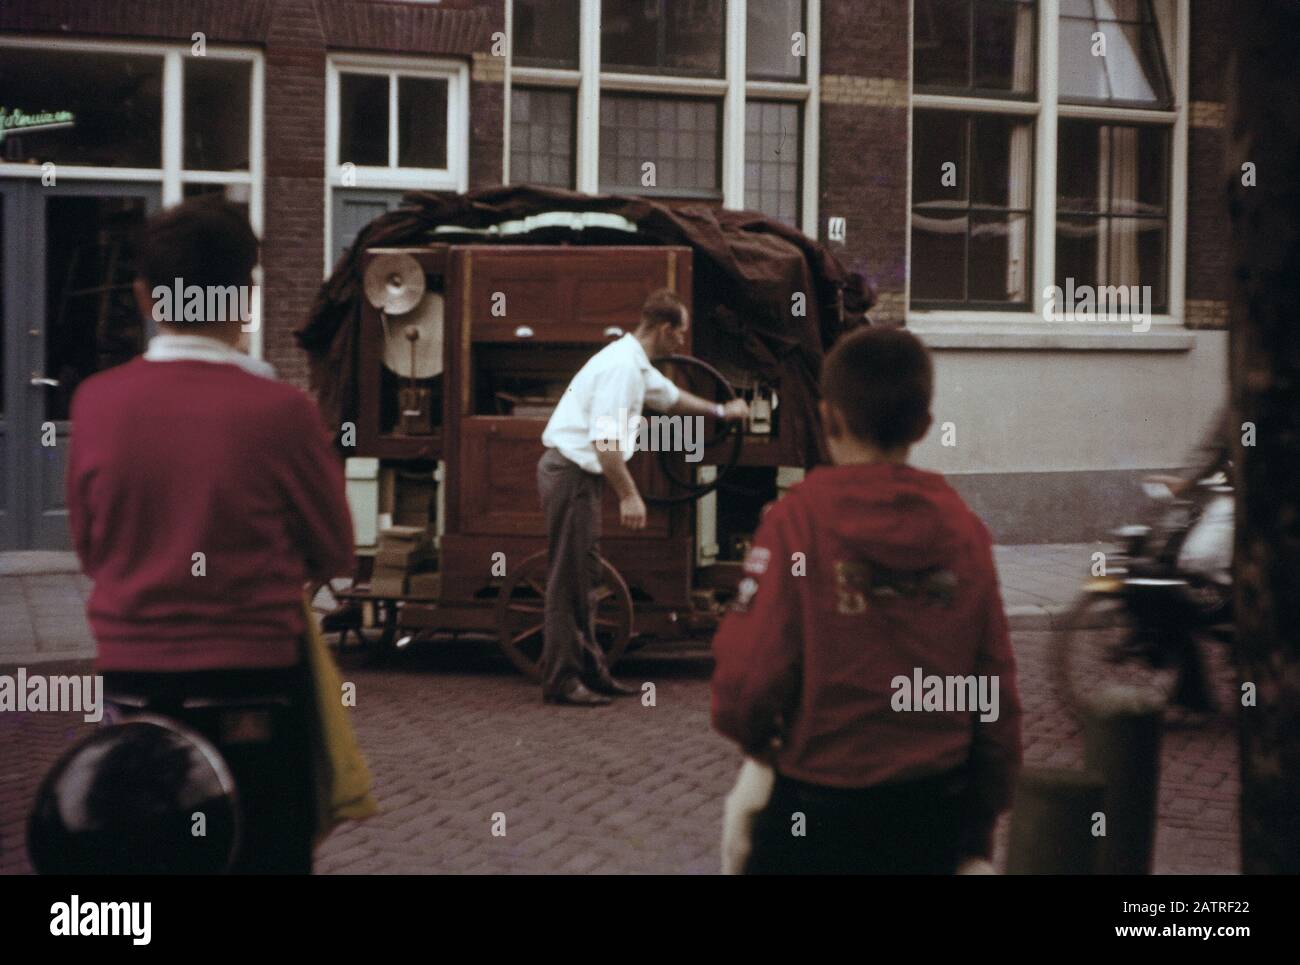 Vernacular photograph taken on a 35mm analog film transparency, believed to depict man in red shirt standing near brown wooden cabinet, likely an organ grinder or one man band show, 1970. Major topics/objects detected include Street. () Stock Photo